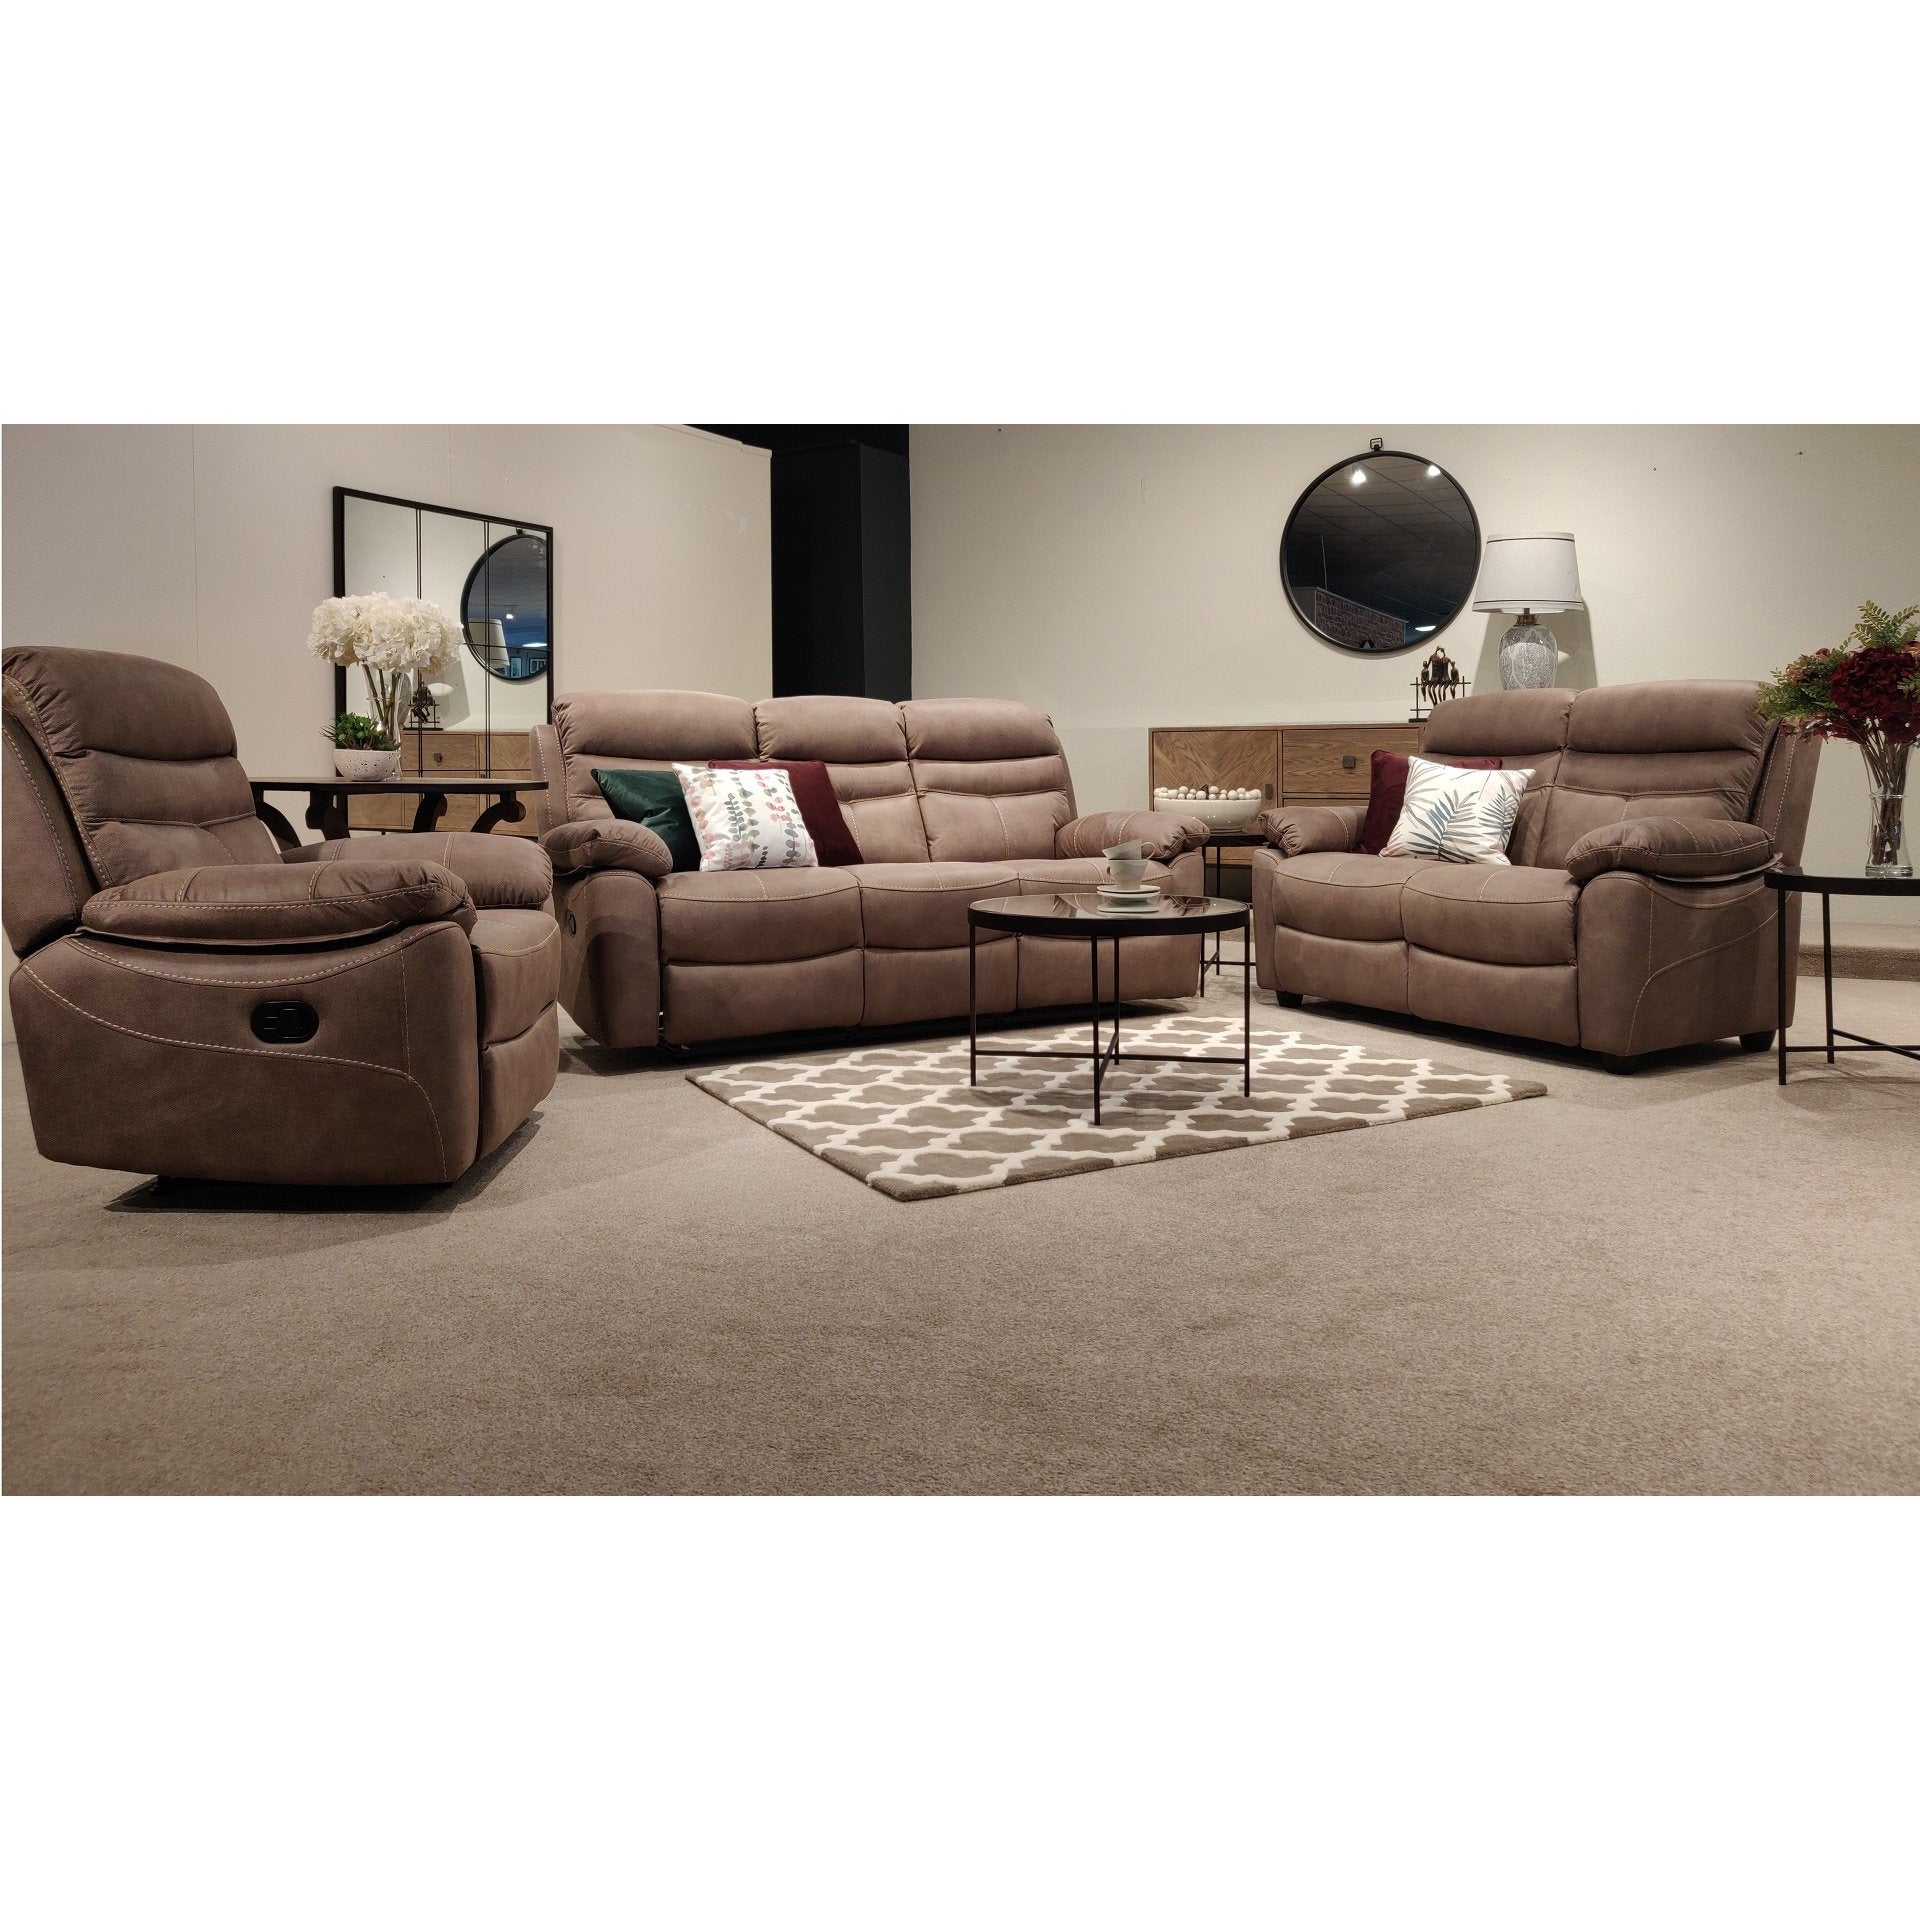 Lucy 3 Seater Recliner Pecan from Upstairs Downstairs Furniture in Lisburn, Monaghan and Enniskillen